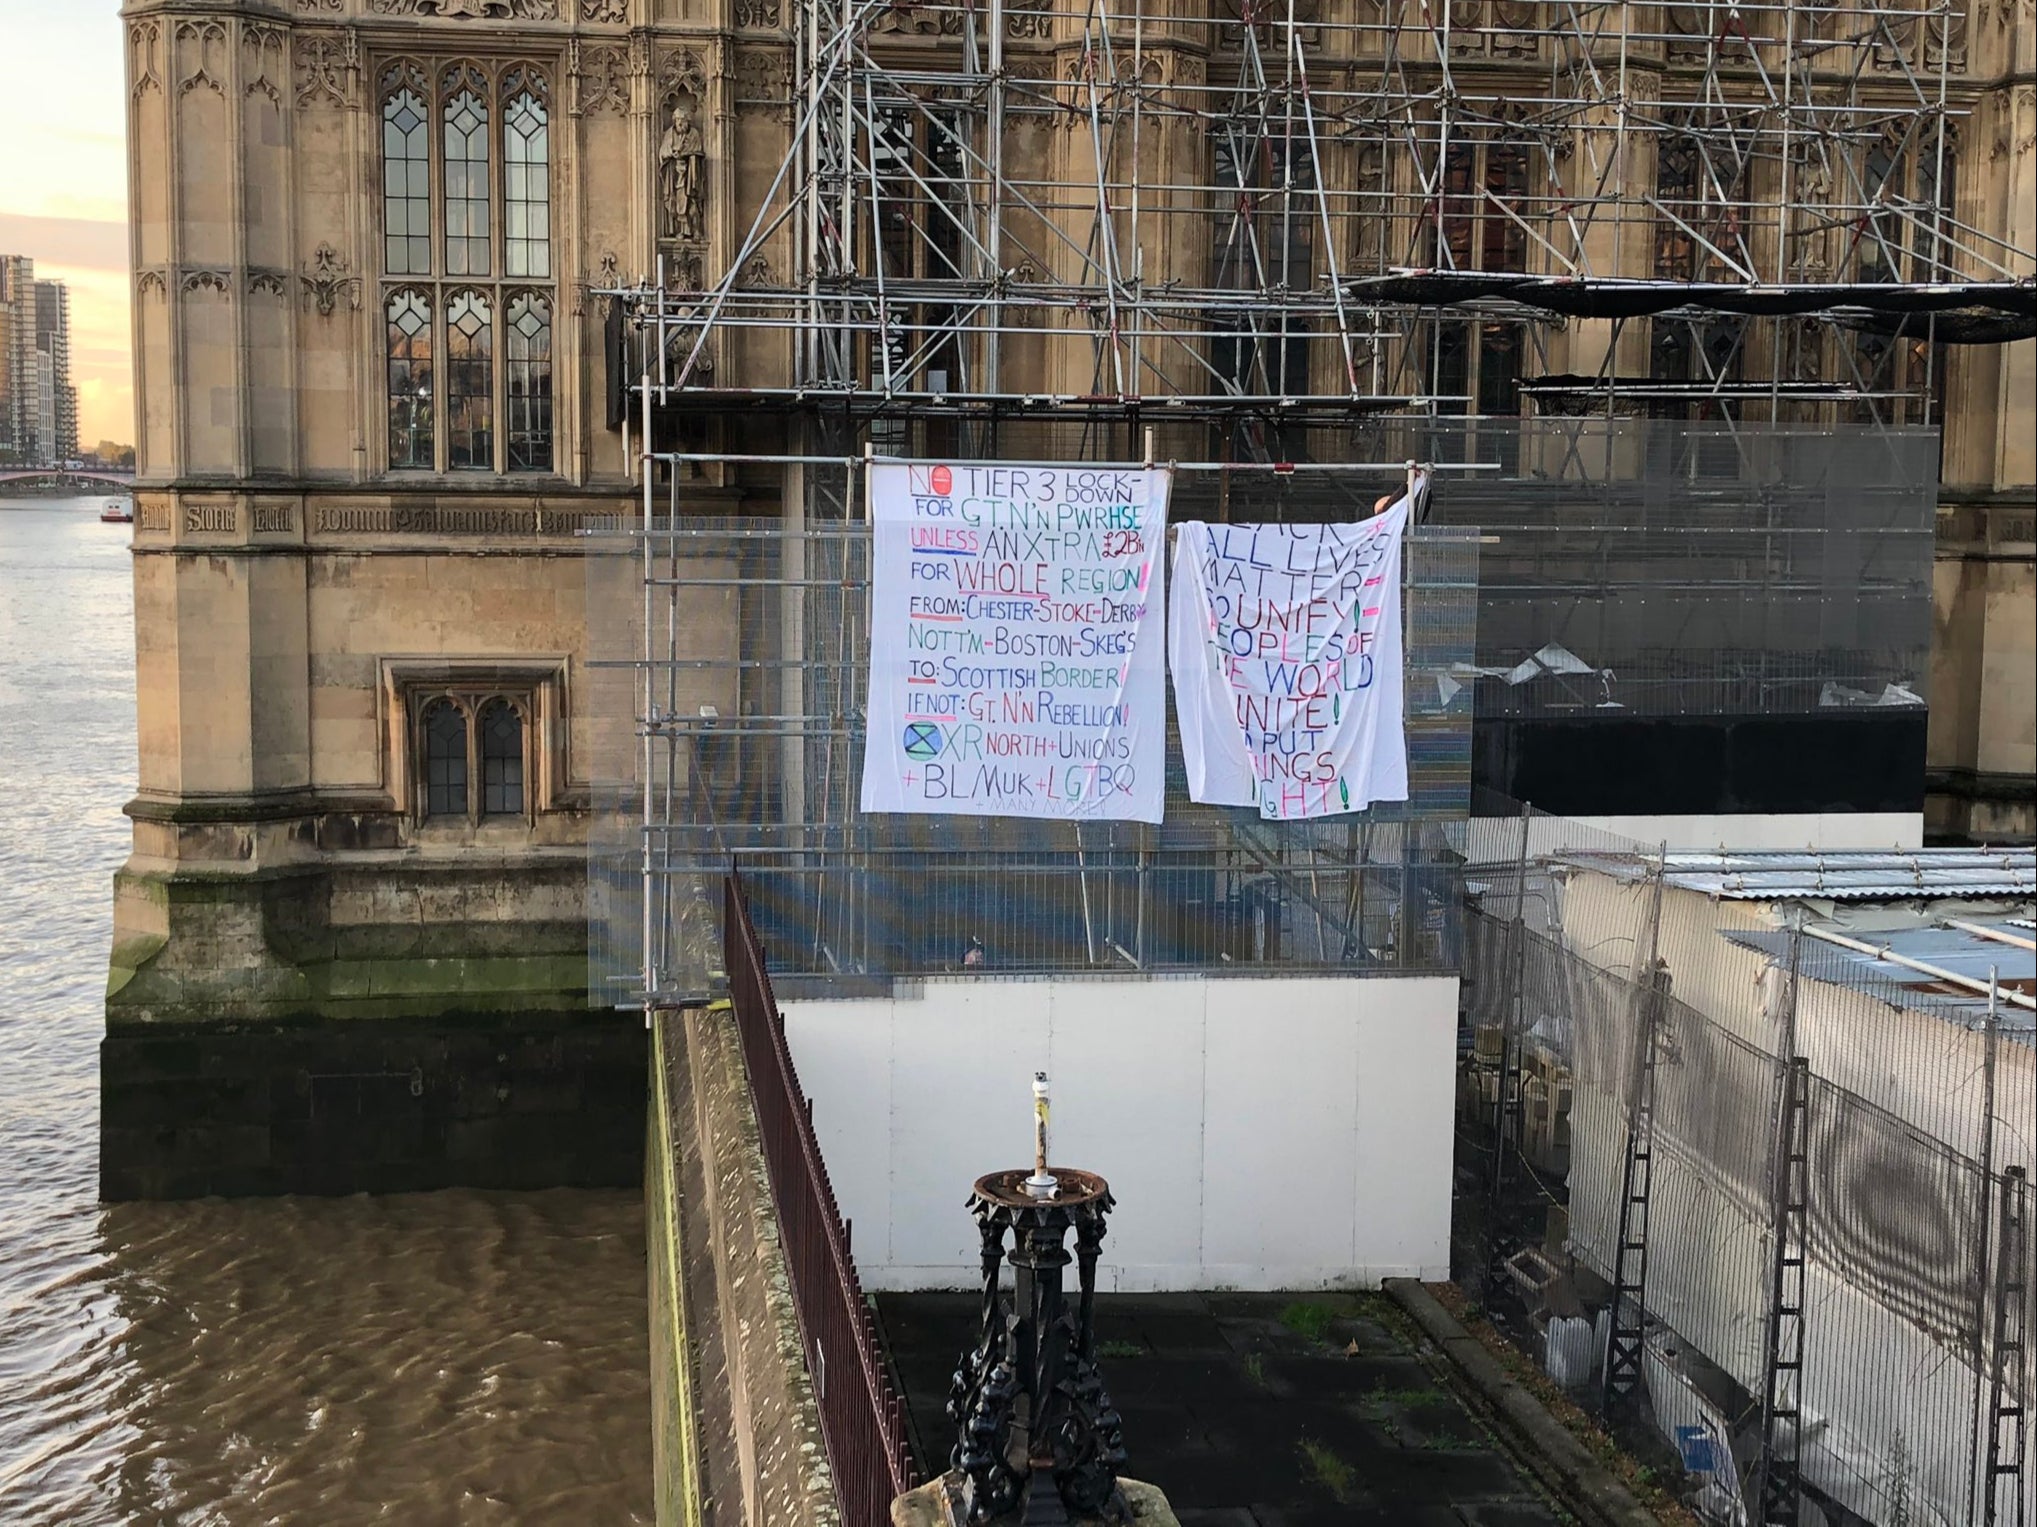 Banners displayed by activist on Big Ben’s scaffolding, photographed by a passerby